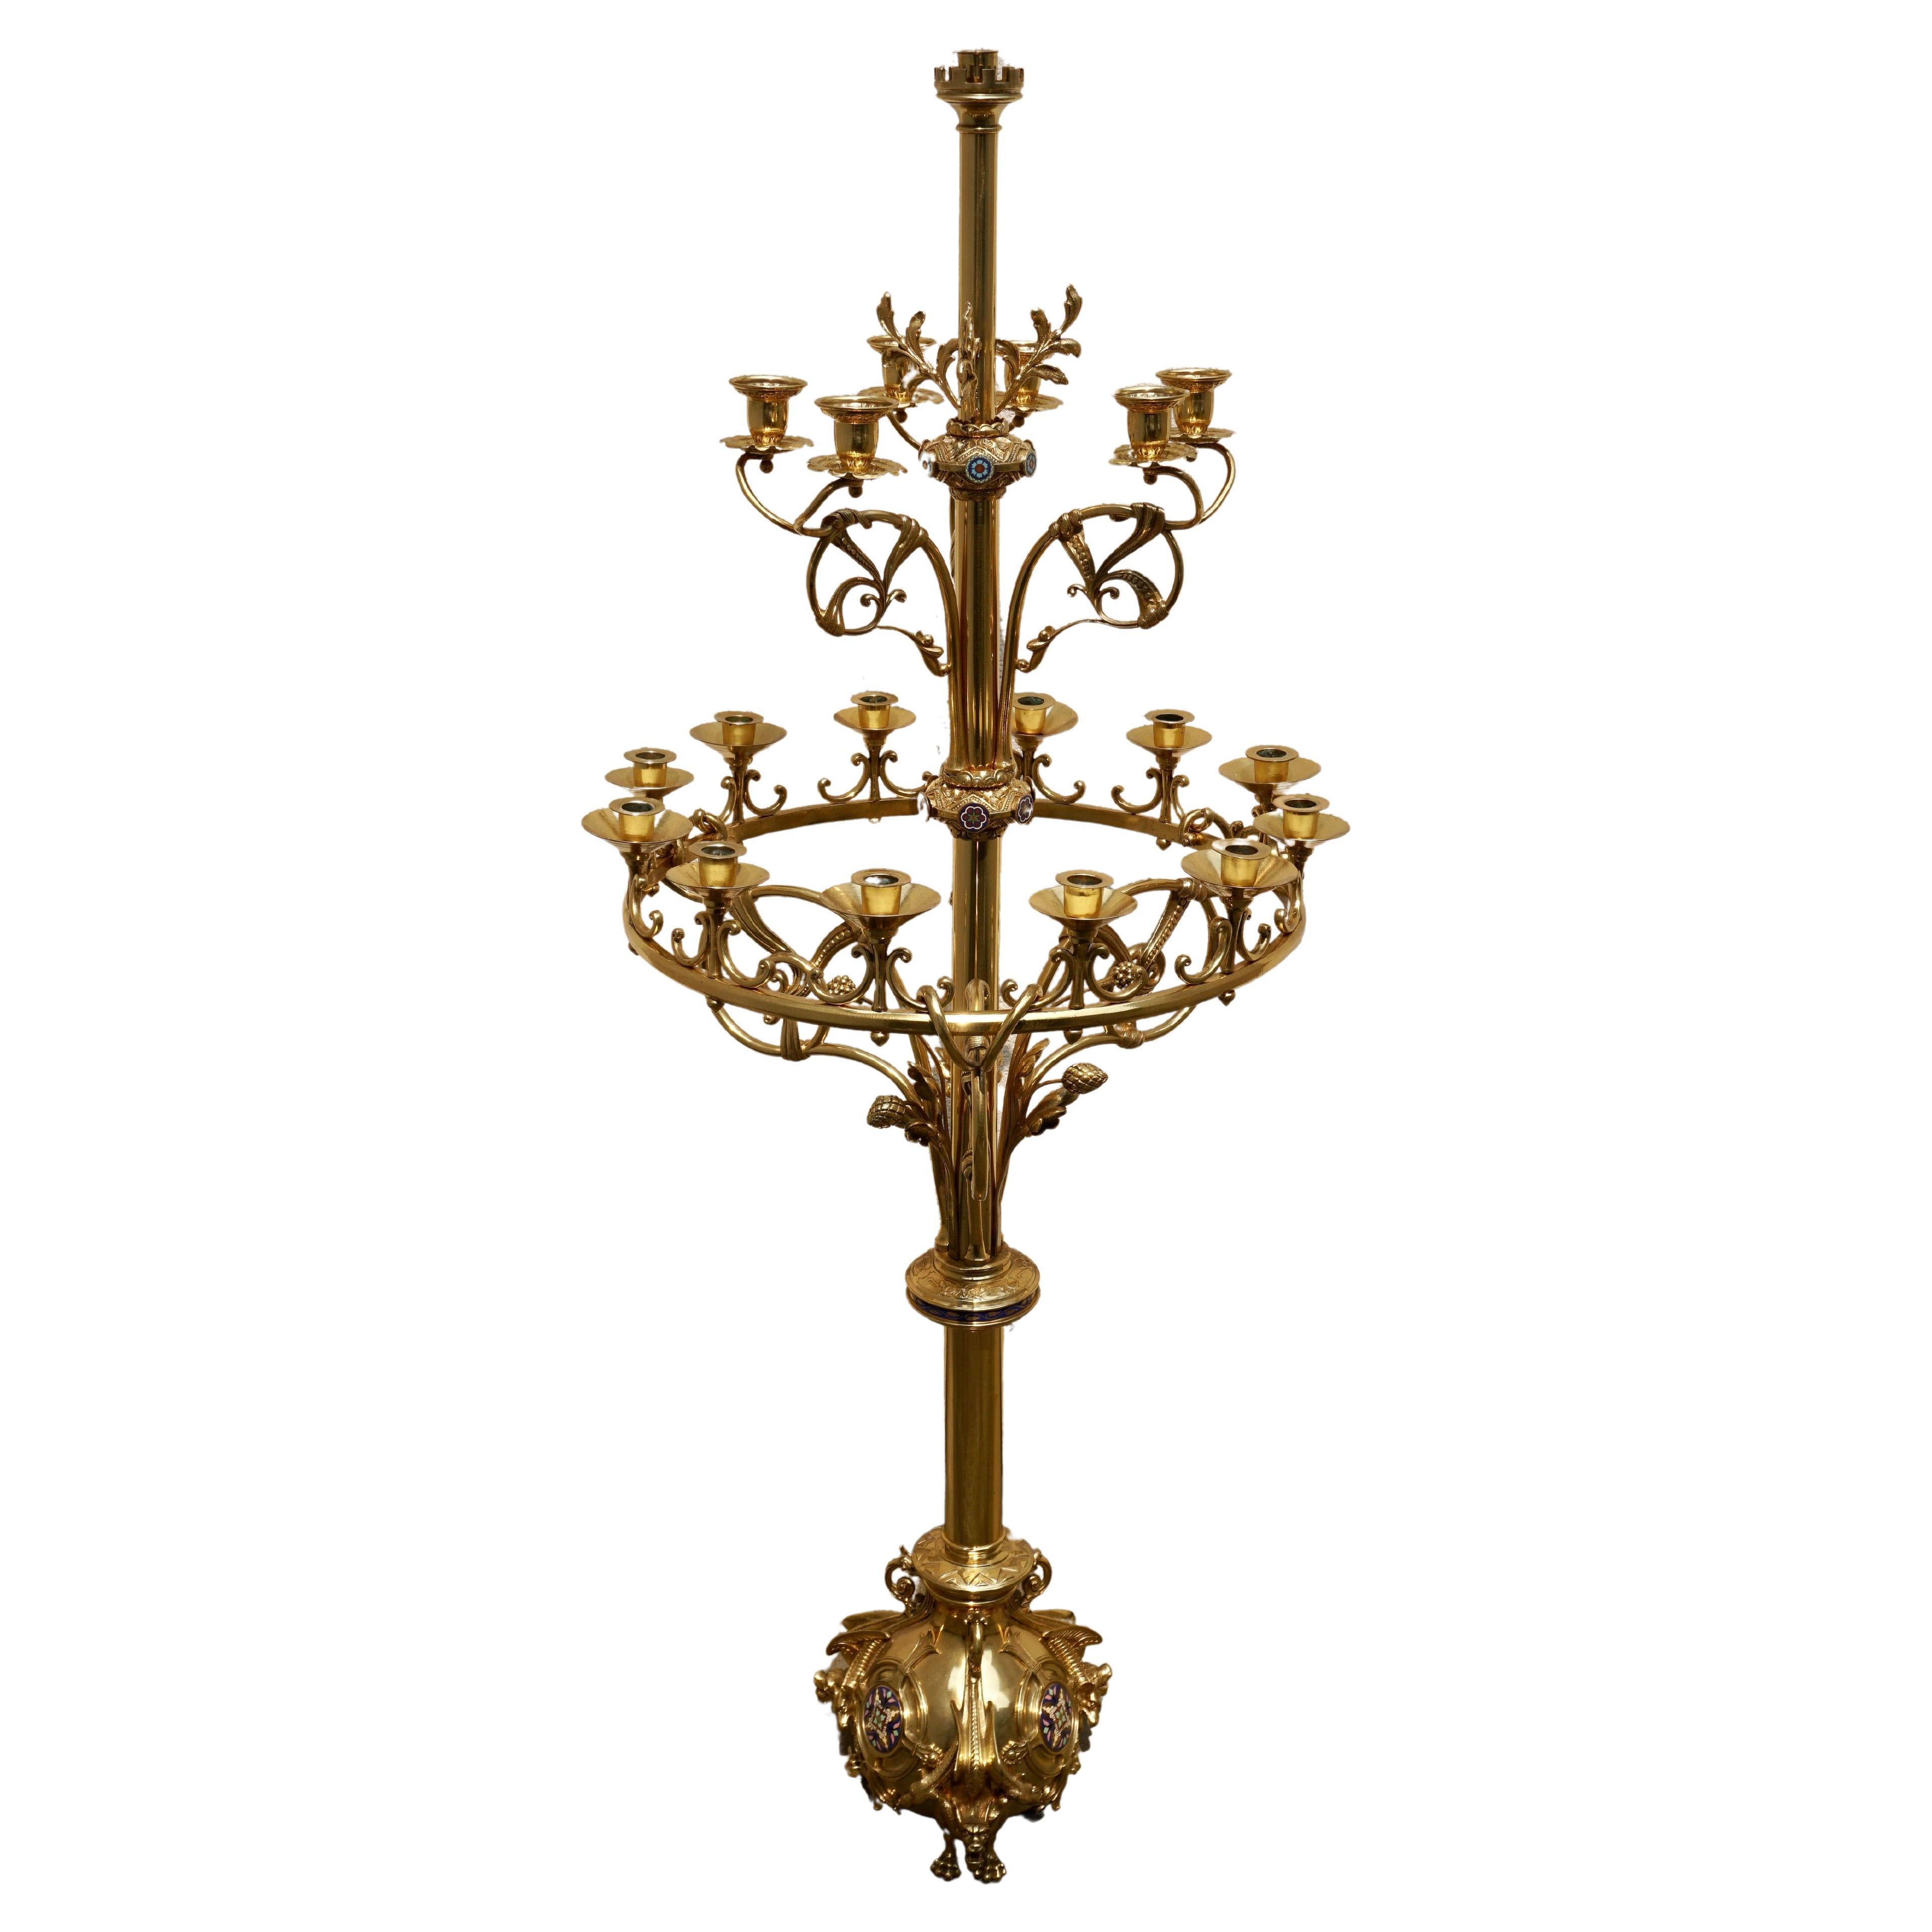 Large Church Antique Torcheres Floor Candlestick for 19 Candles For Sale